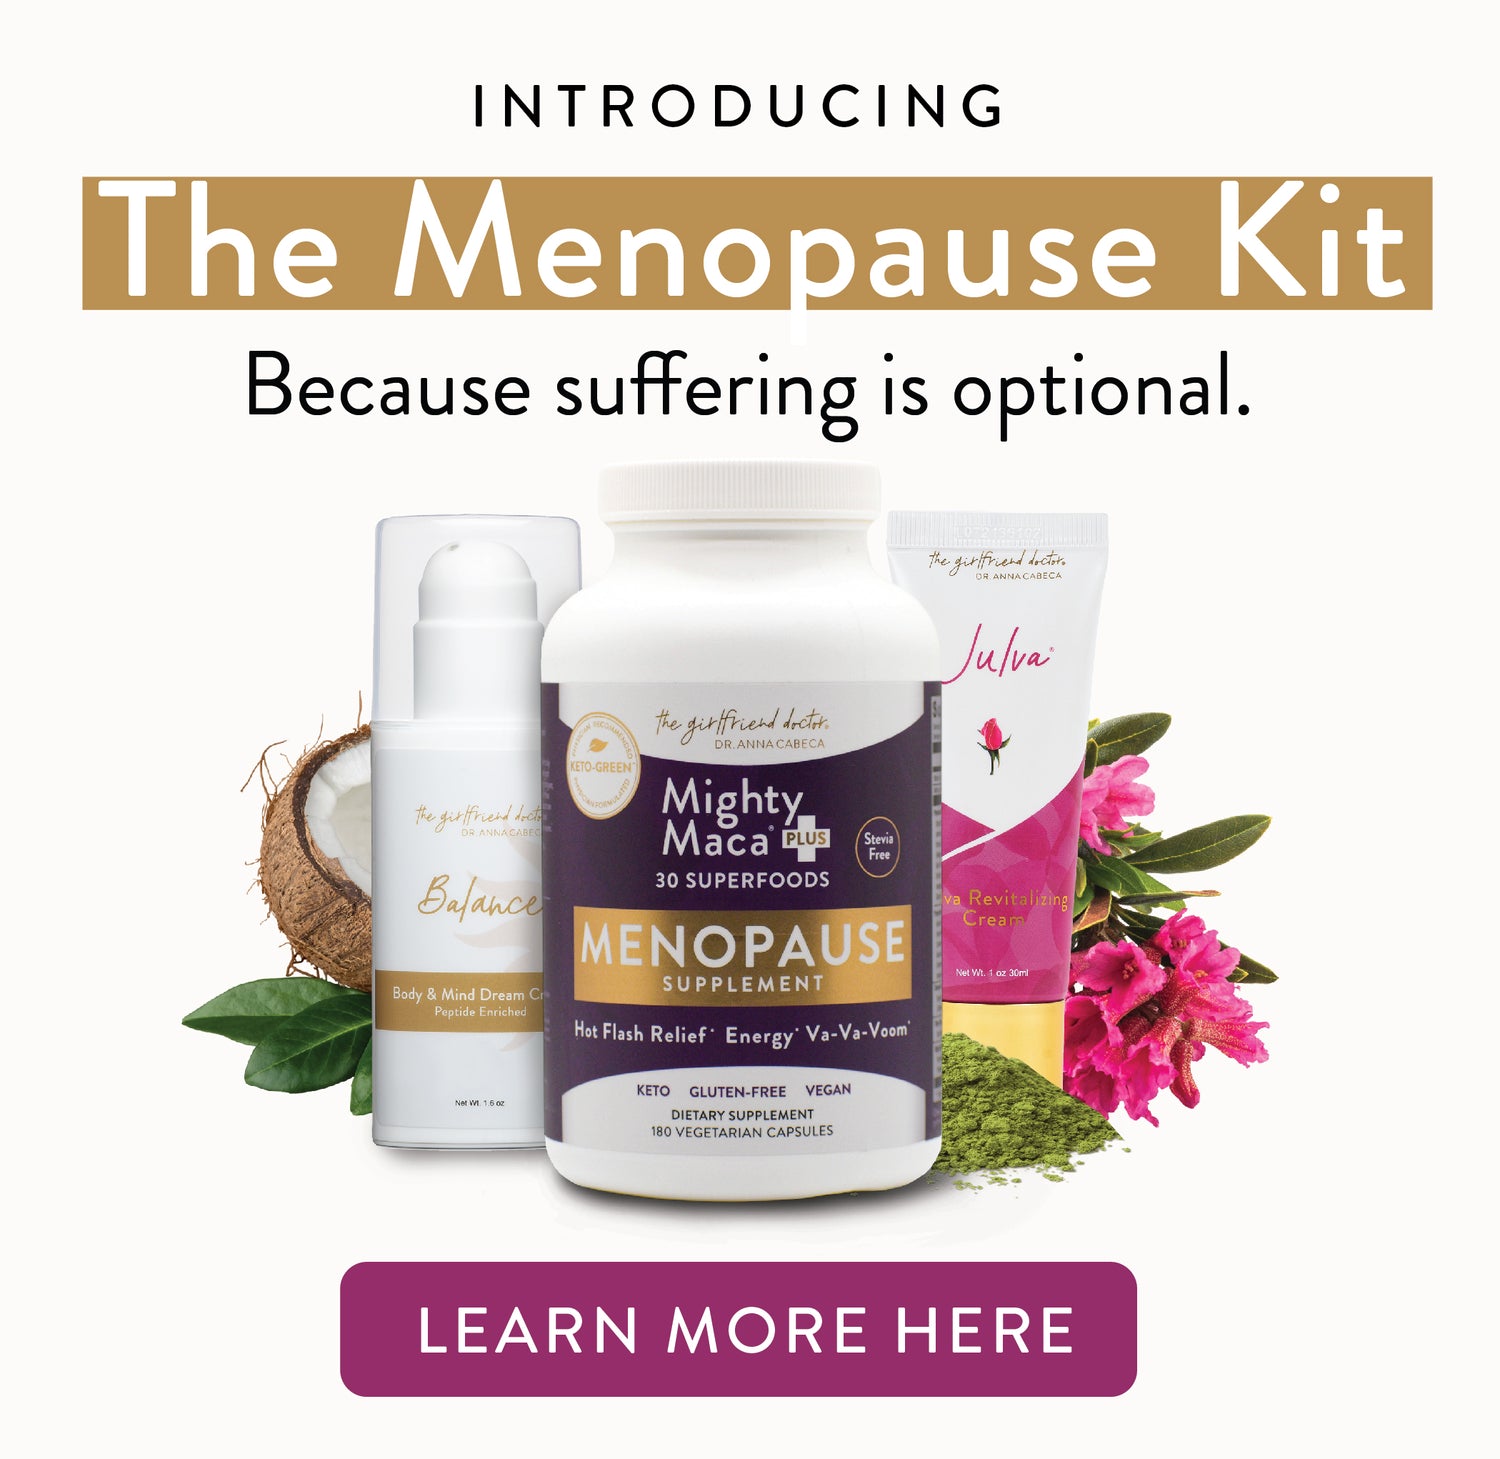 Introducing The Menopause Kit. Because suffering is optional. Learn More Here